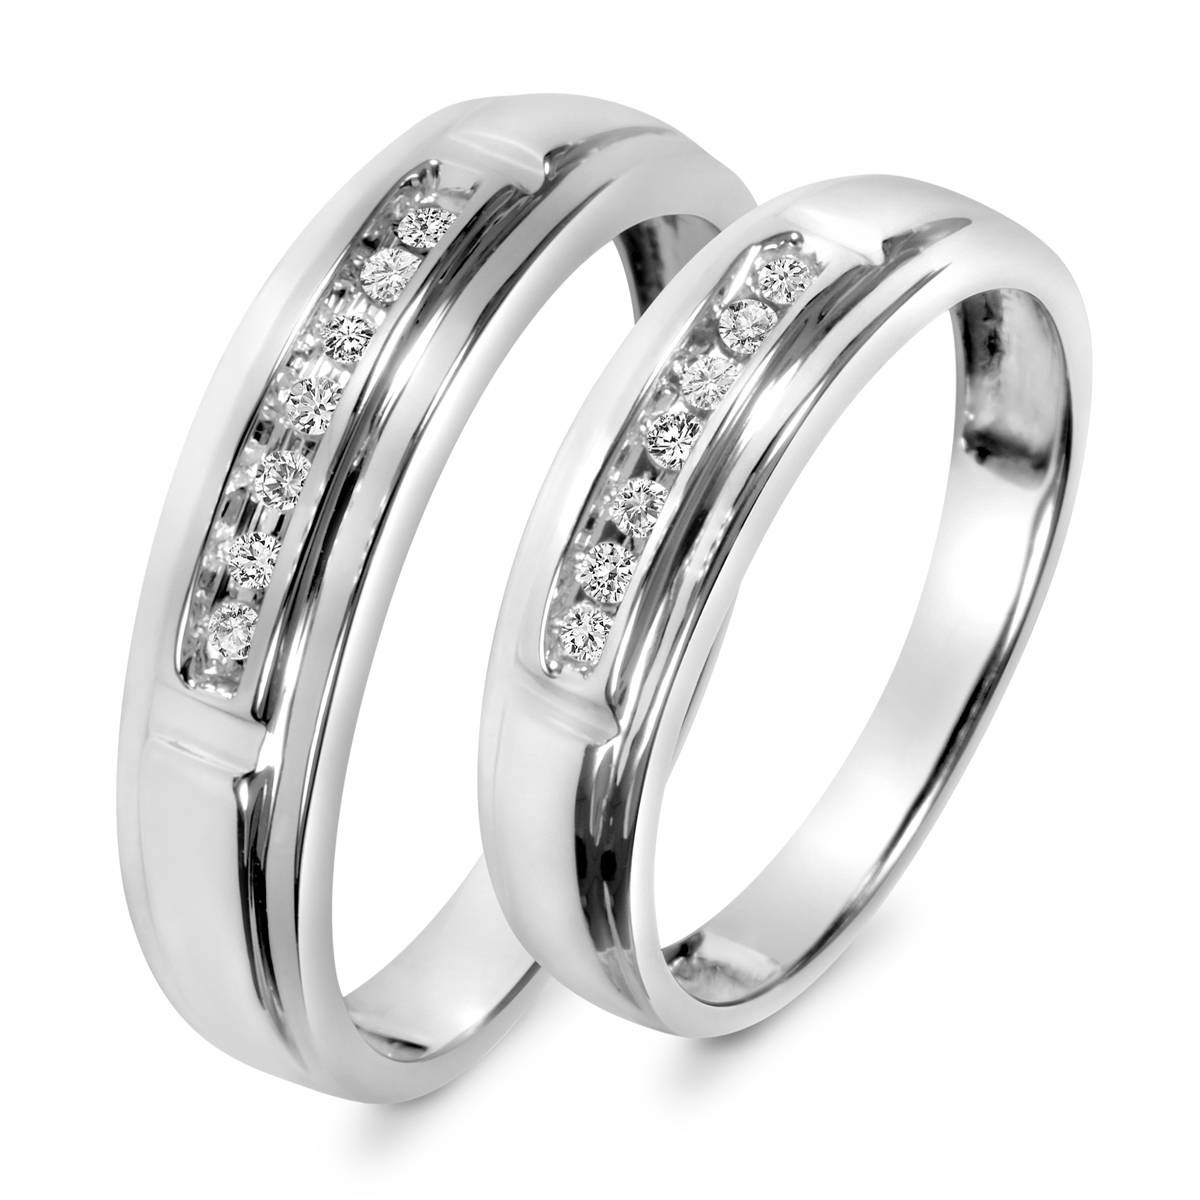 Wedding Bands Sets
 15 Inspirations of Matching Wedding Bands Sets For His And Her